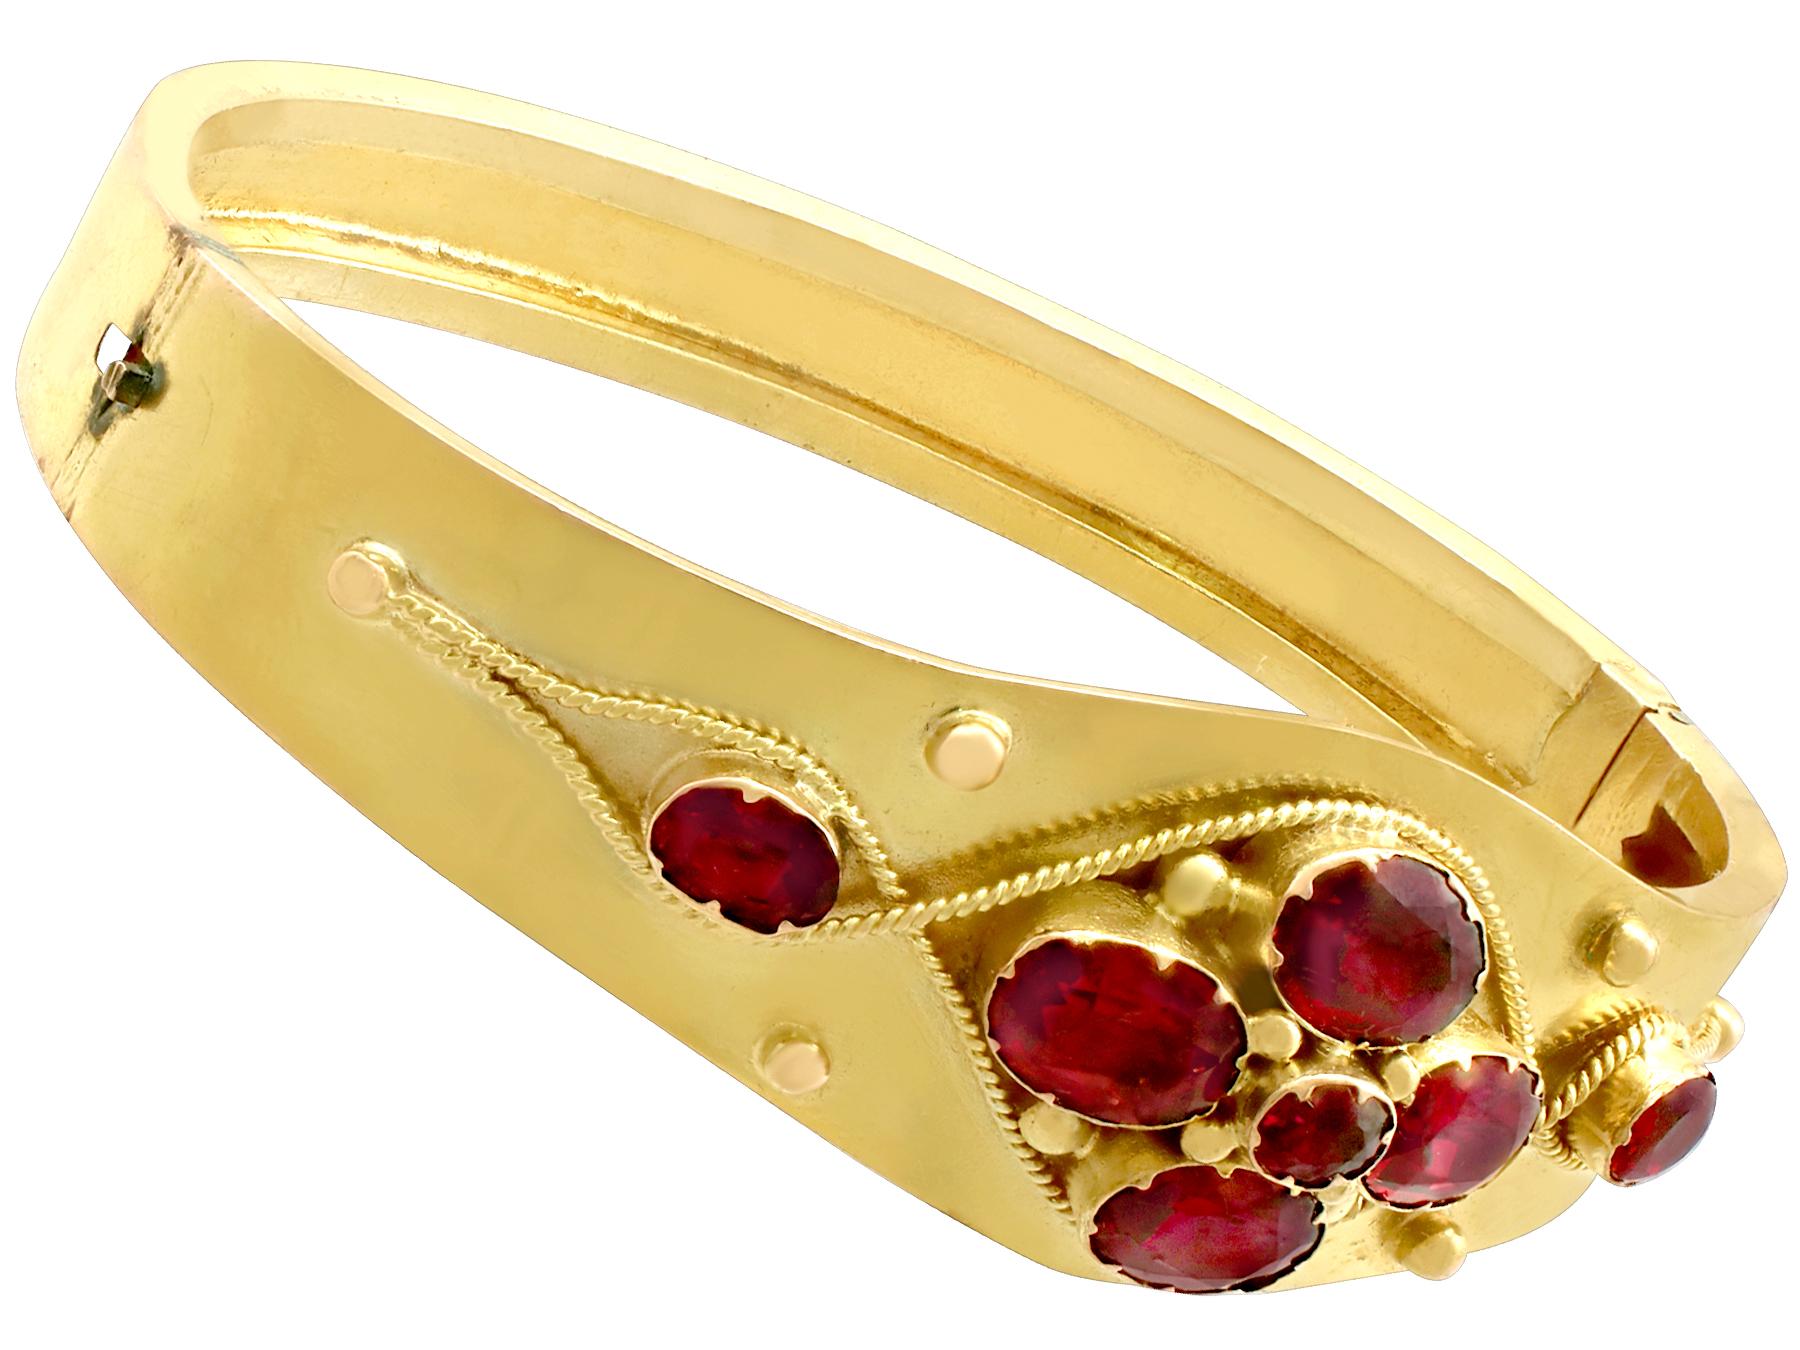 A fine and impressive antique Victorian bangle in 18k yellow gold, embellished with 5.24 carat garnets - boxed; part of our bangle and bracelet collection.

This fine and impressive Victorian bangle has been crafted in 18k yellow gold.

The simple